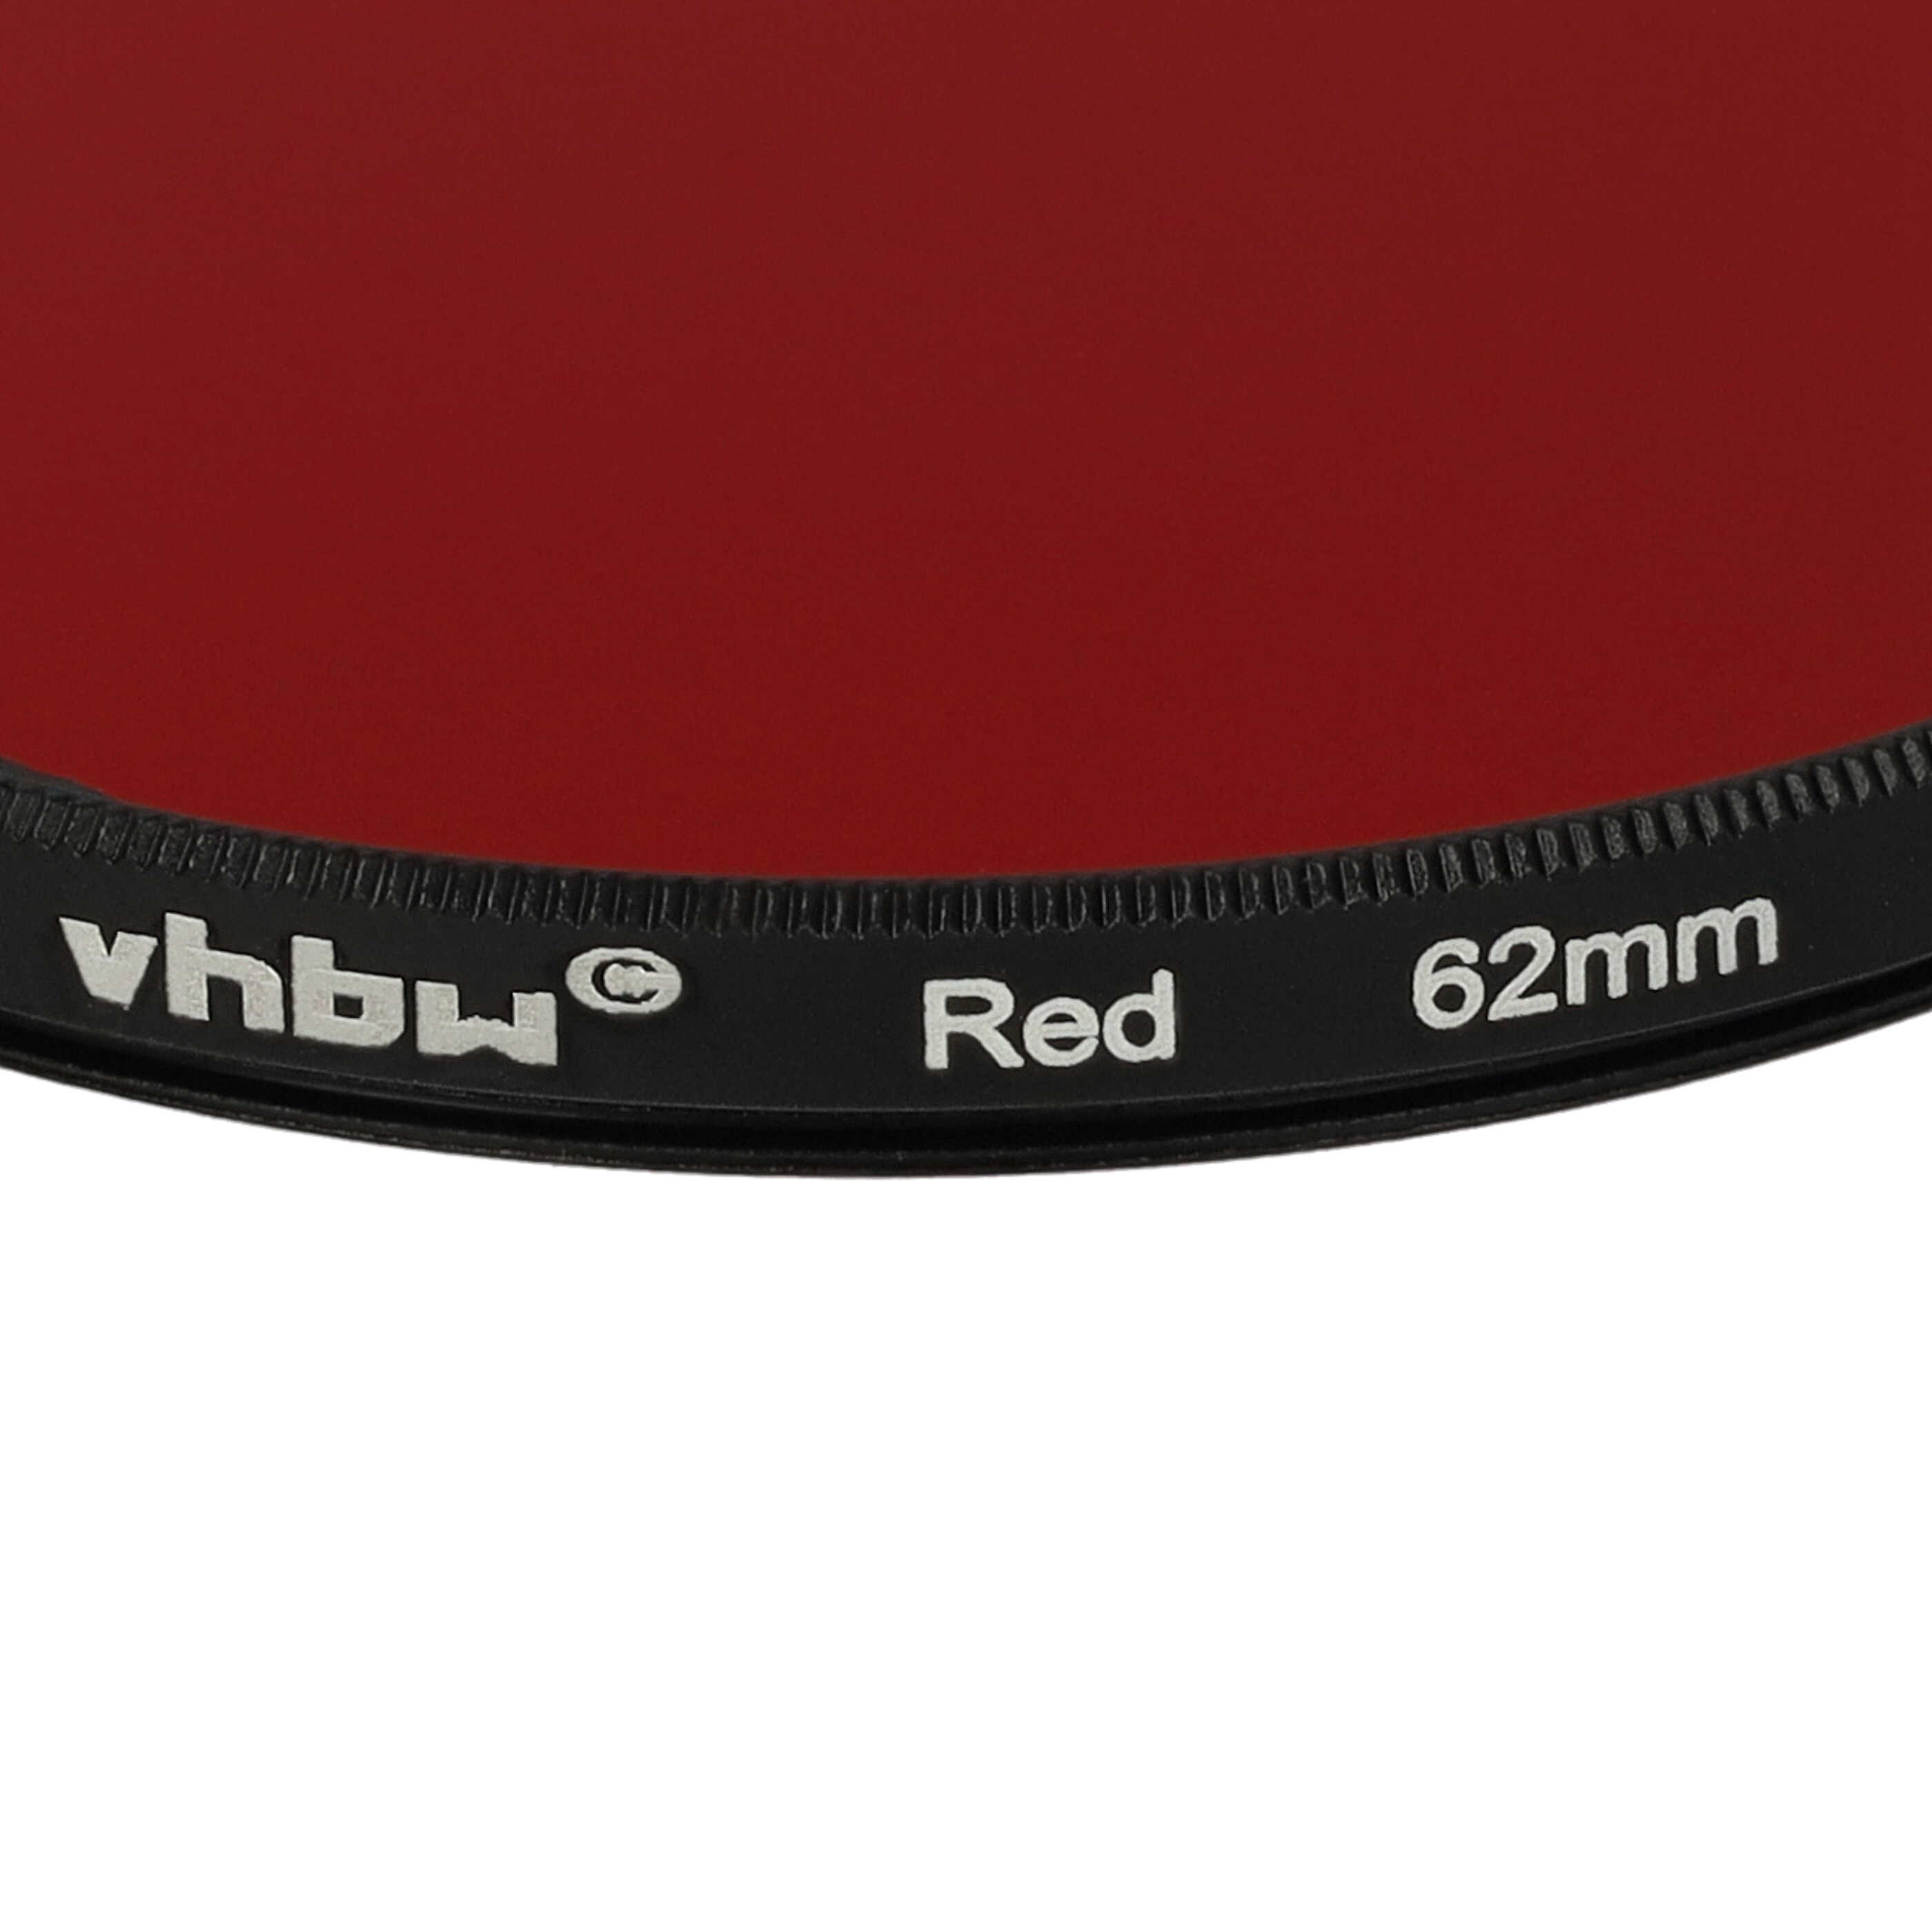 Coloured Filter, Red suitable for Camera Lenses with 62 mm Filter Thread - Red Filter